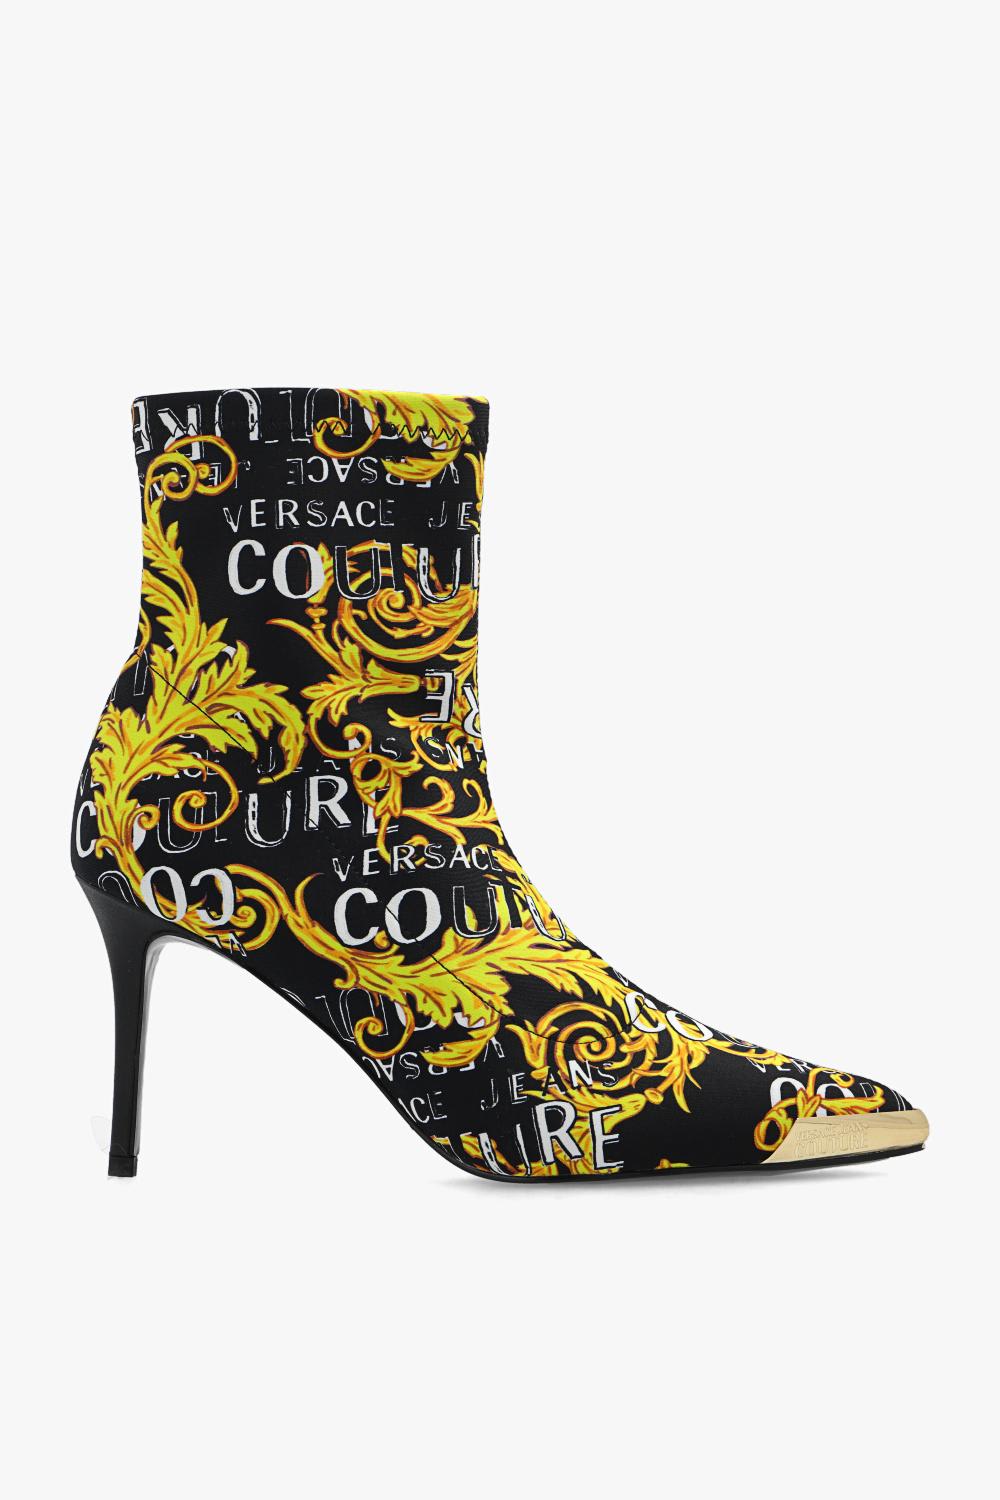 Versace Jeans Couture scarlett Heeled Ankle Boots